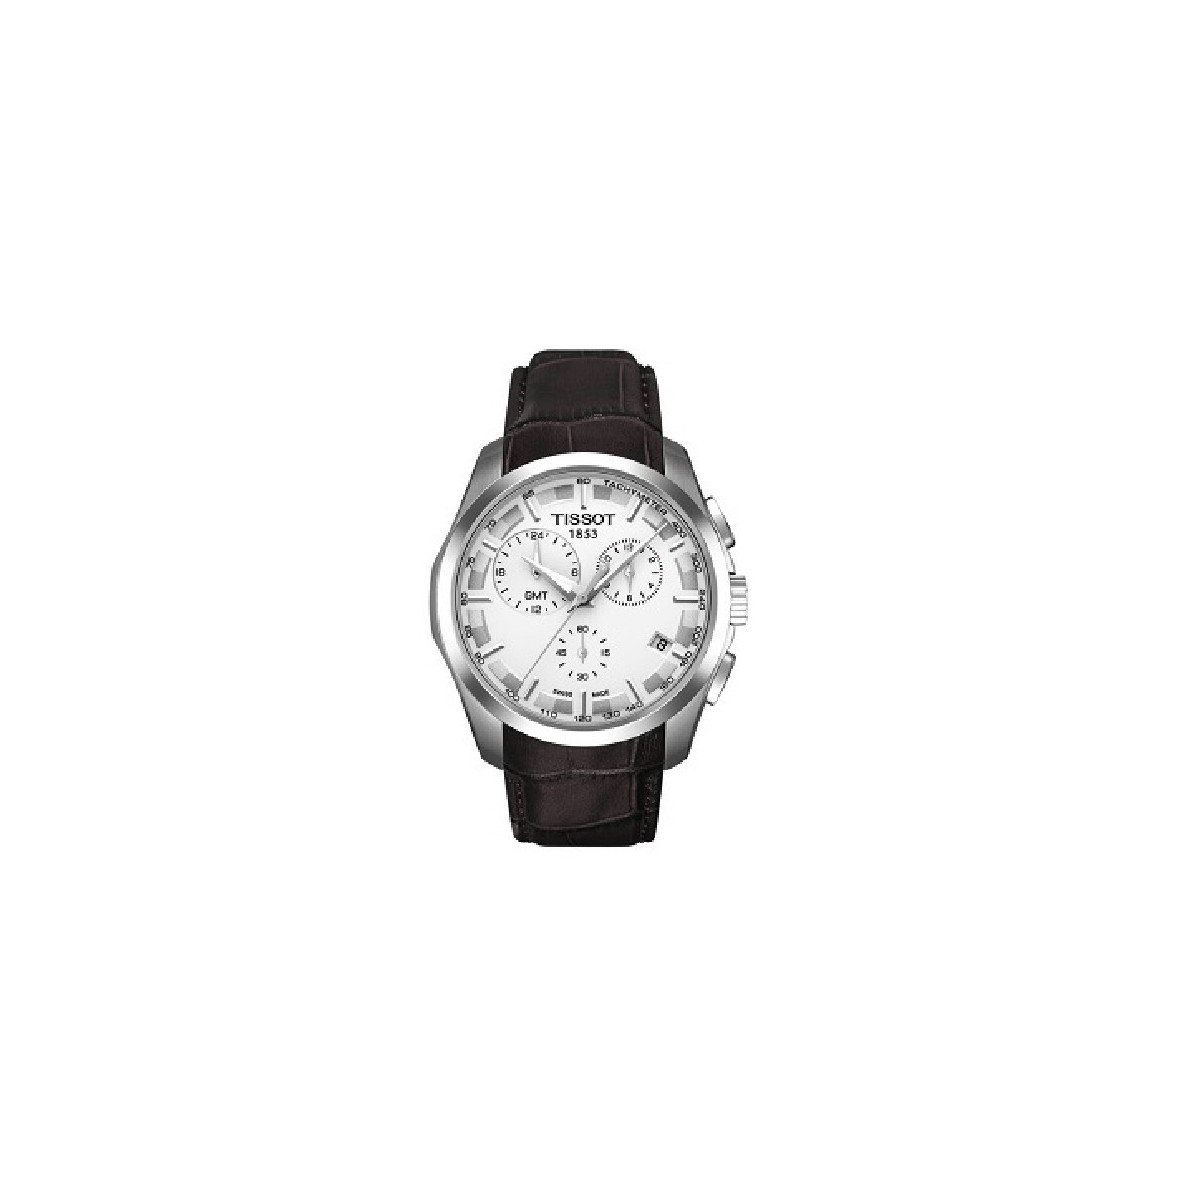 RELLOTGE TISSOT COUTURIER - T0356171603100